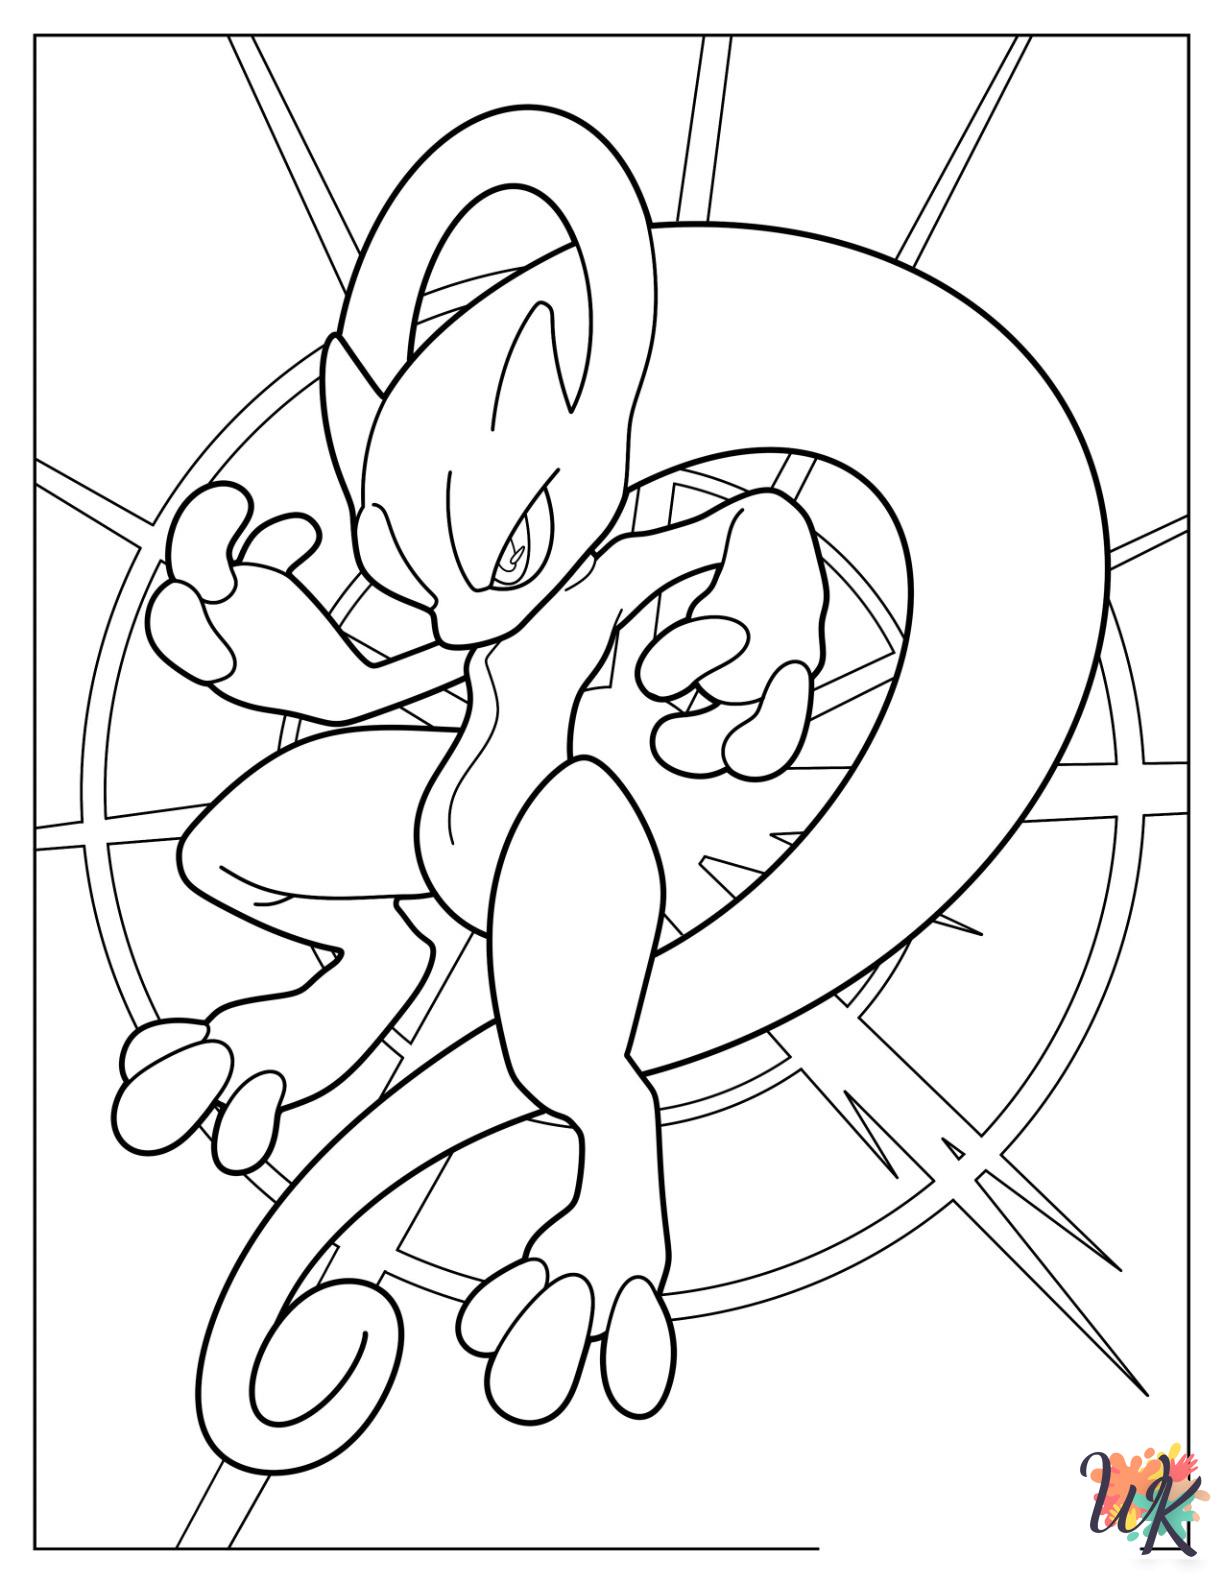 Mewtwo free coloring pages 1